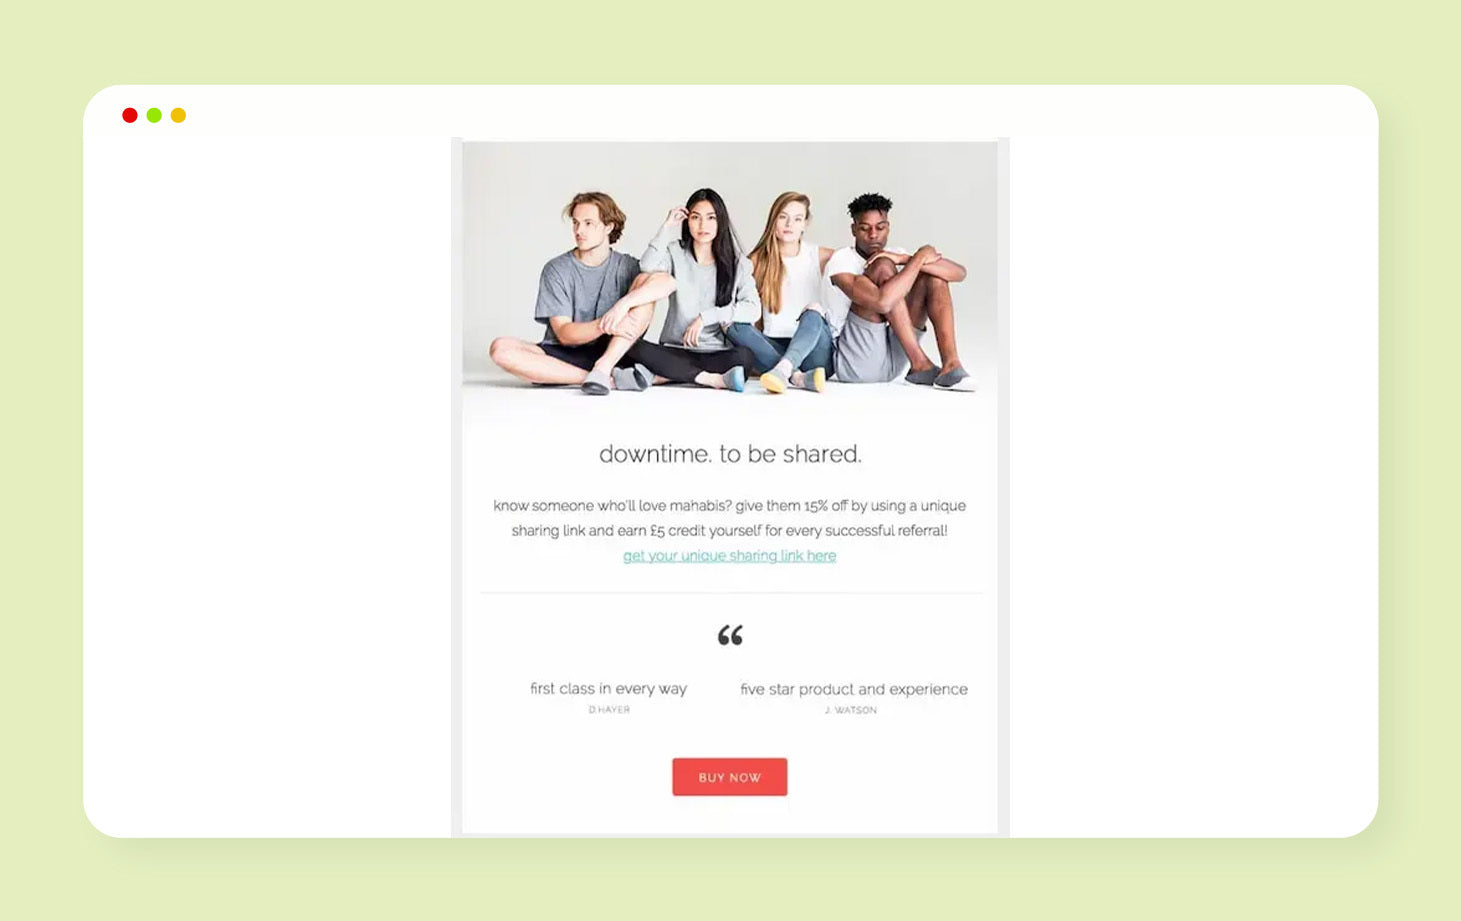 Shopify Email Marketing : 9 Best Practices For Your Ecommerce Business